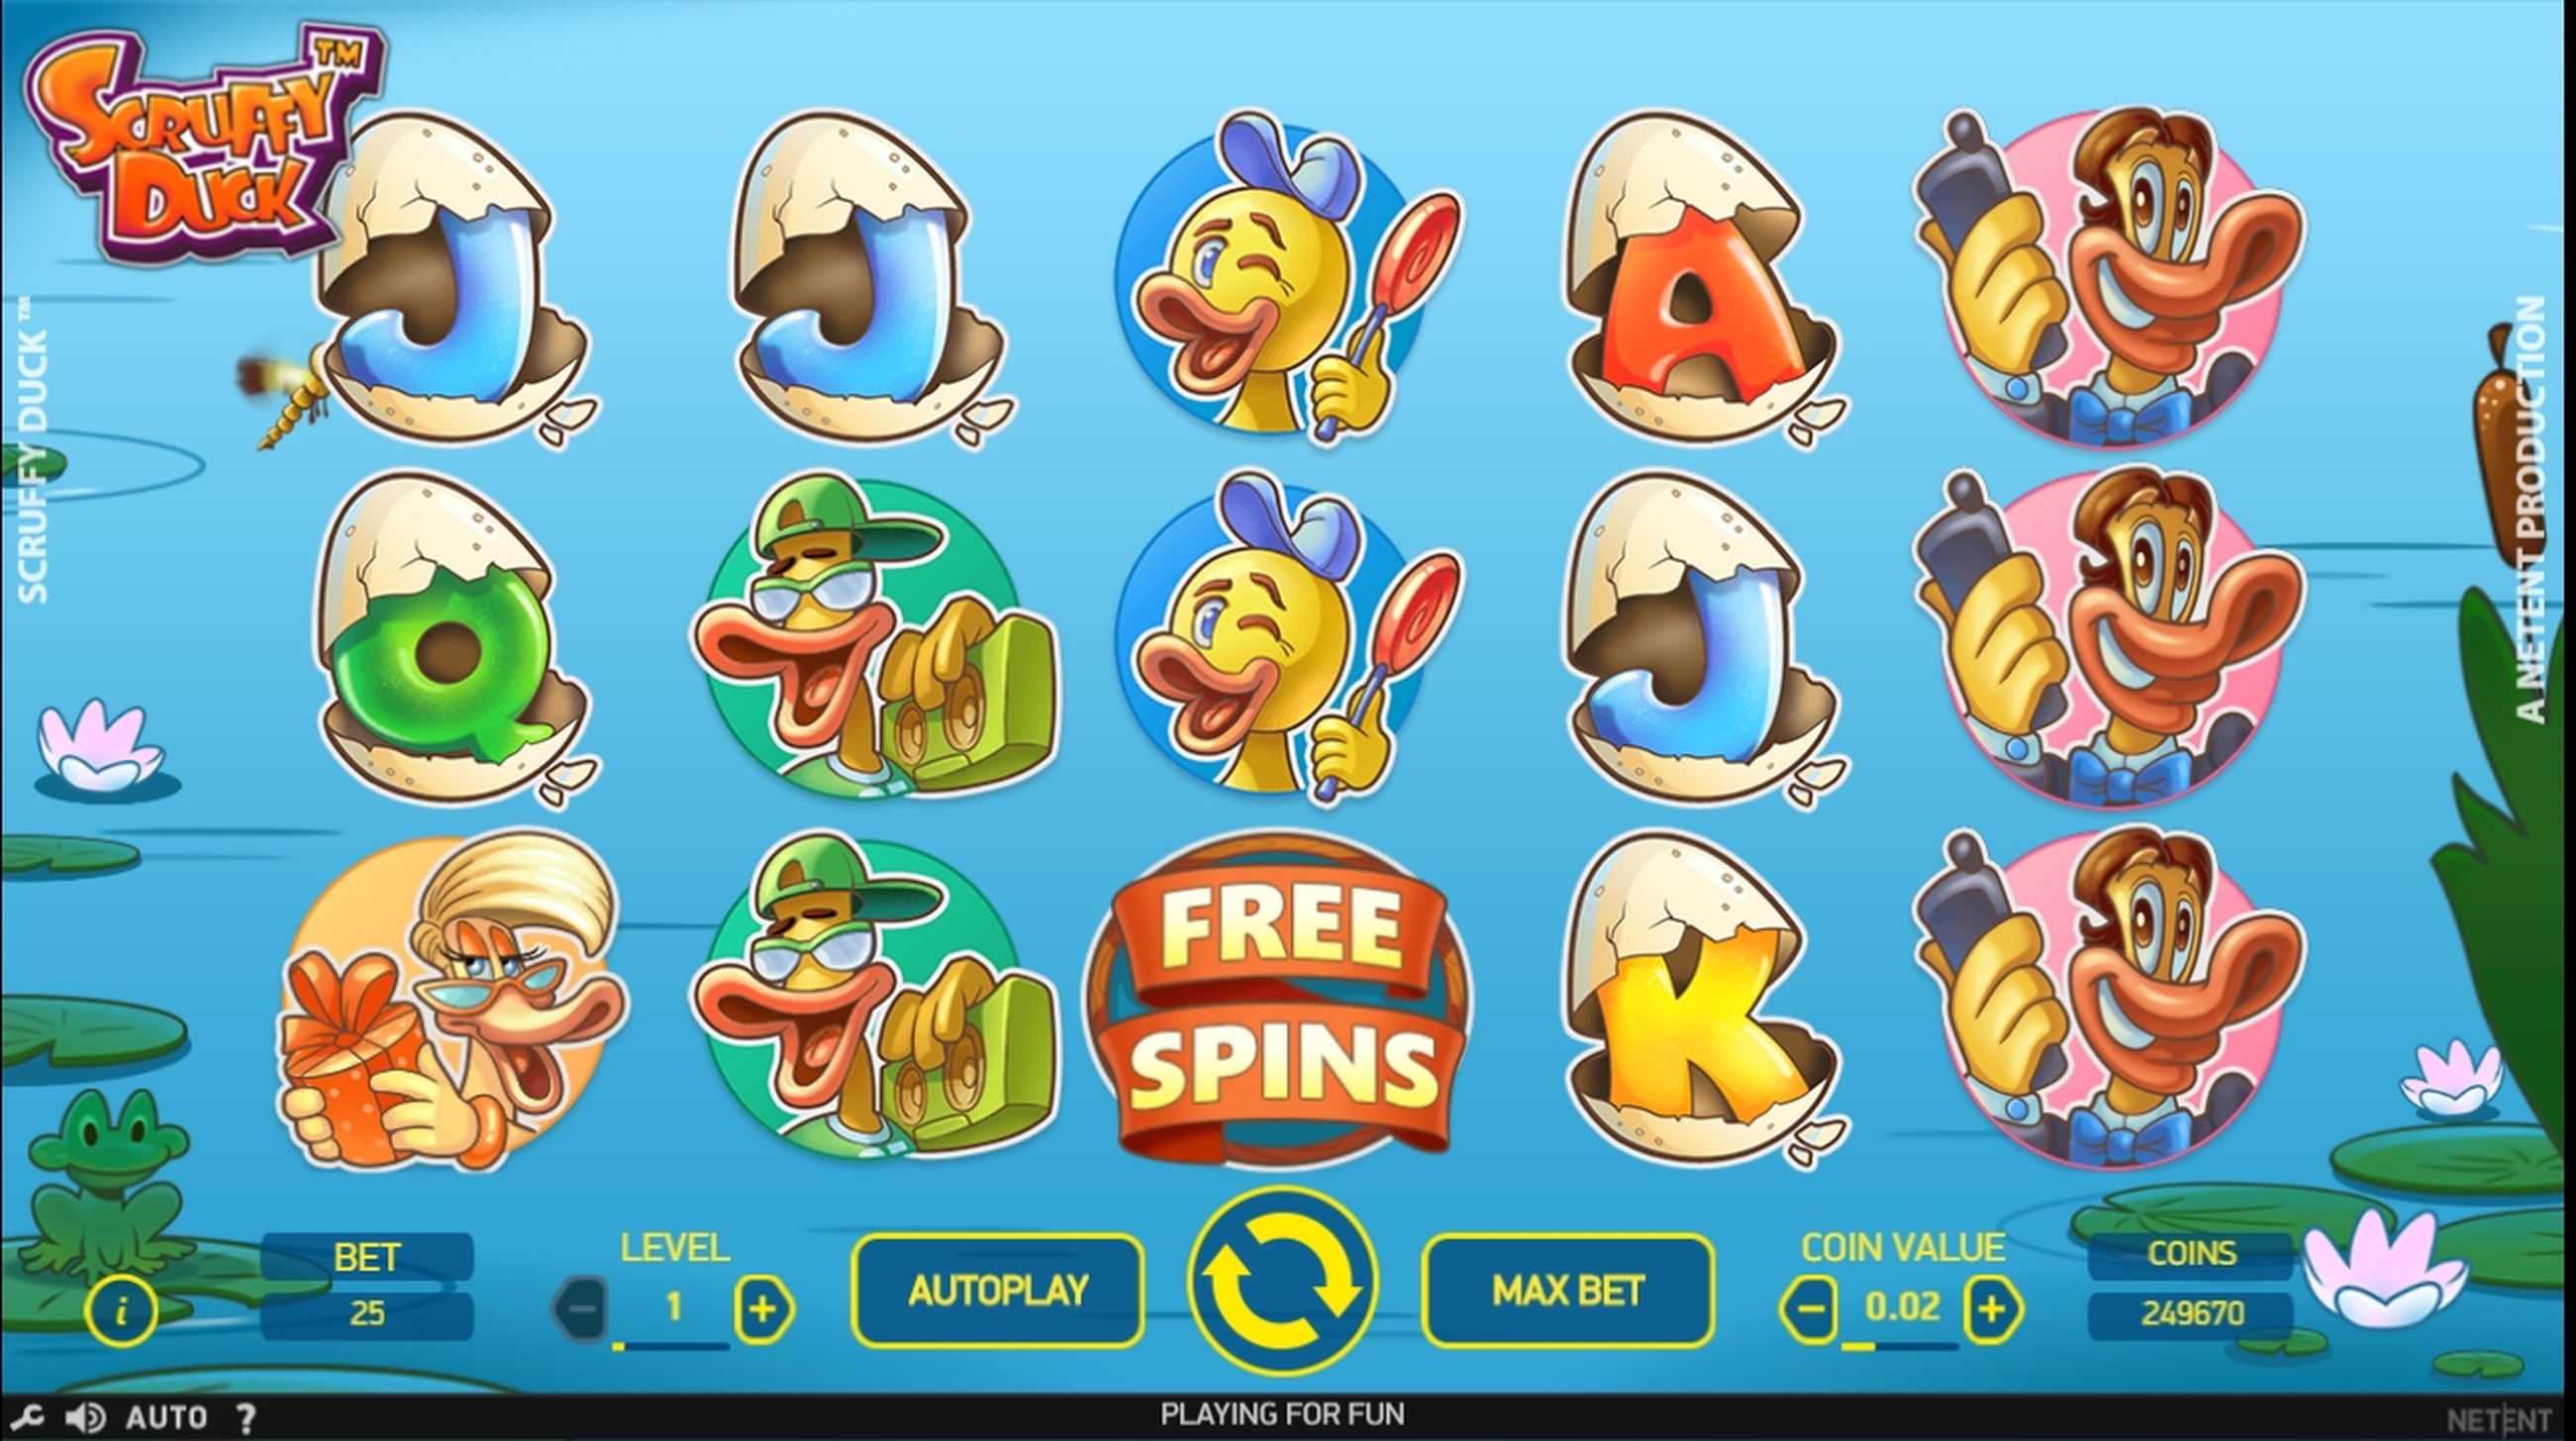 Reels in Scruffy Duck Slot Game by NetEnt